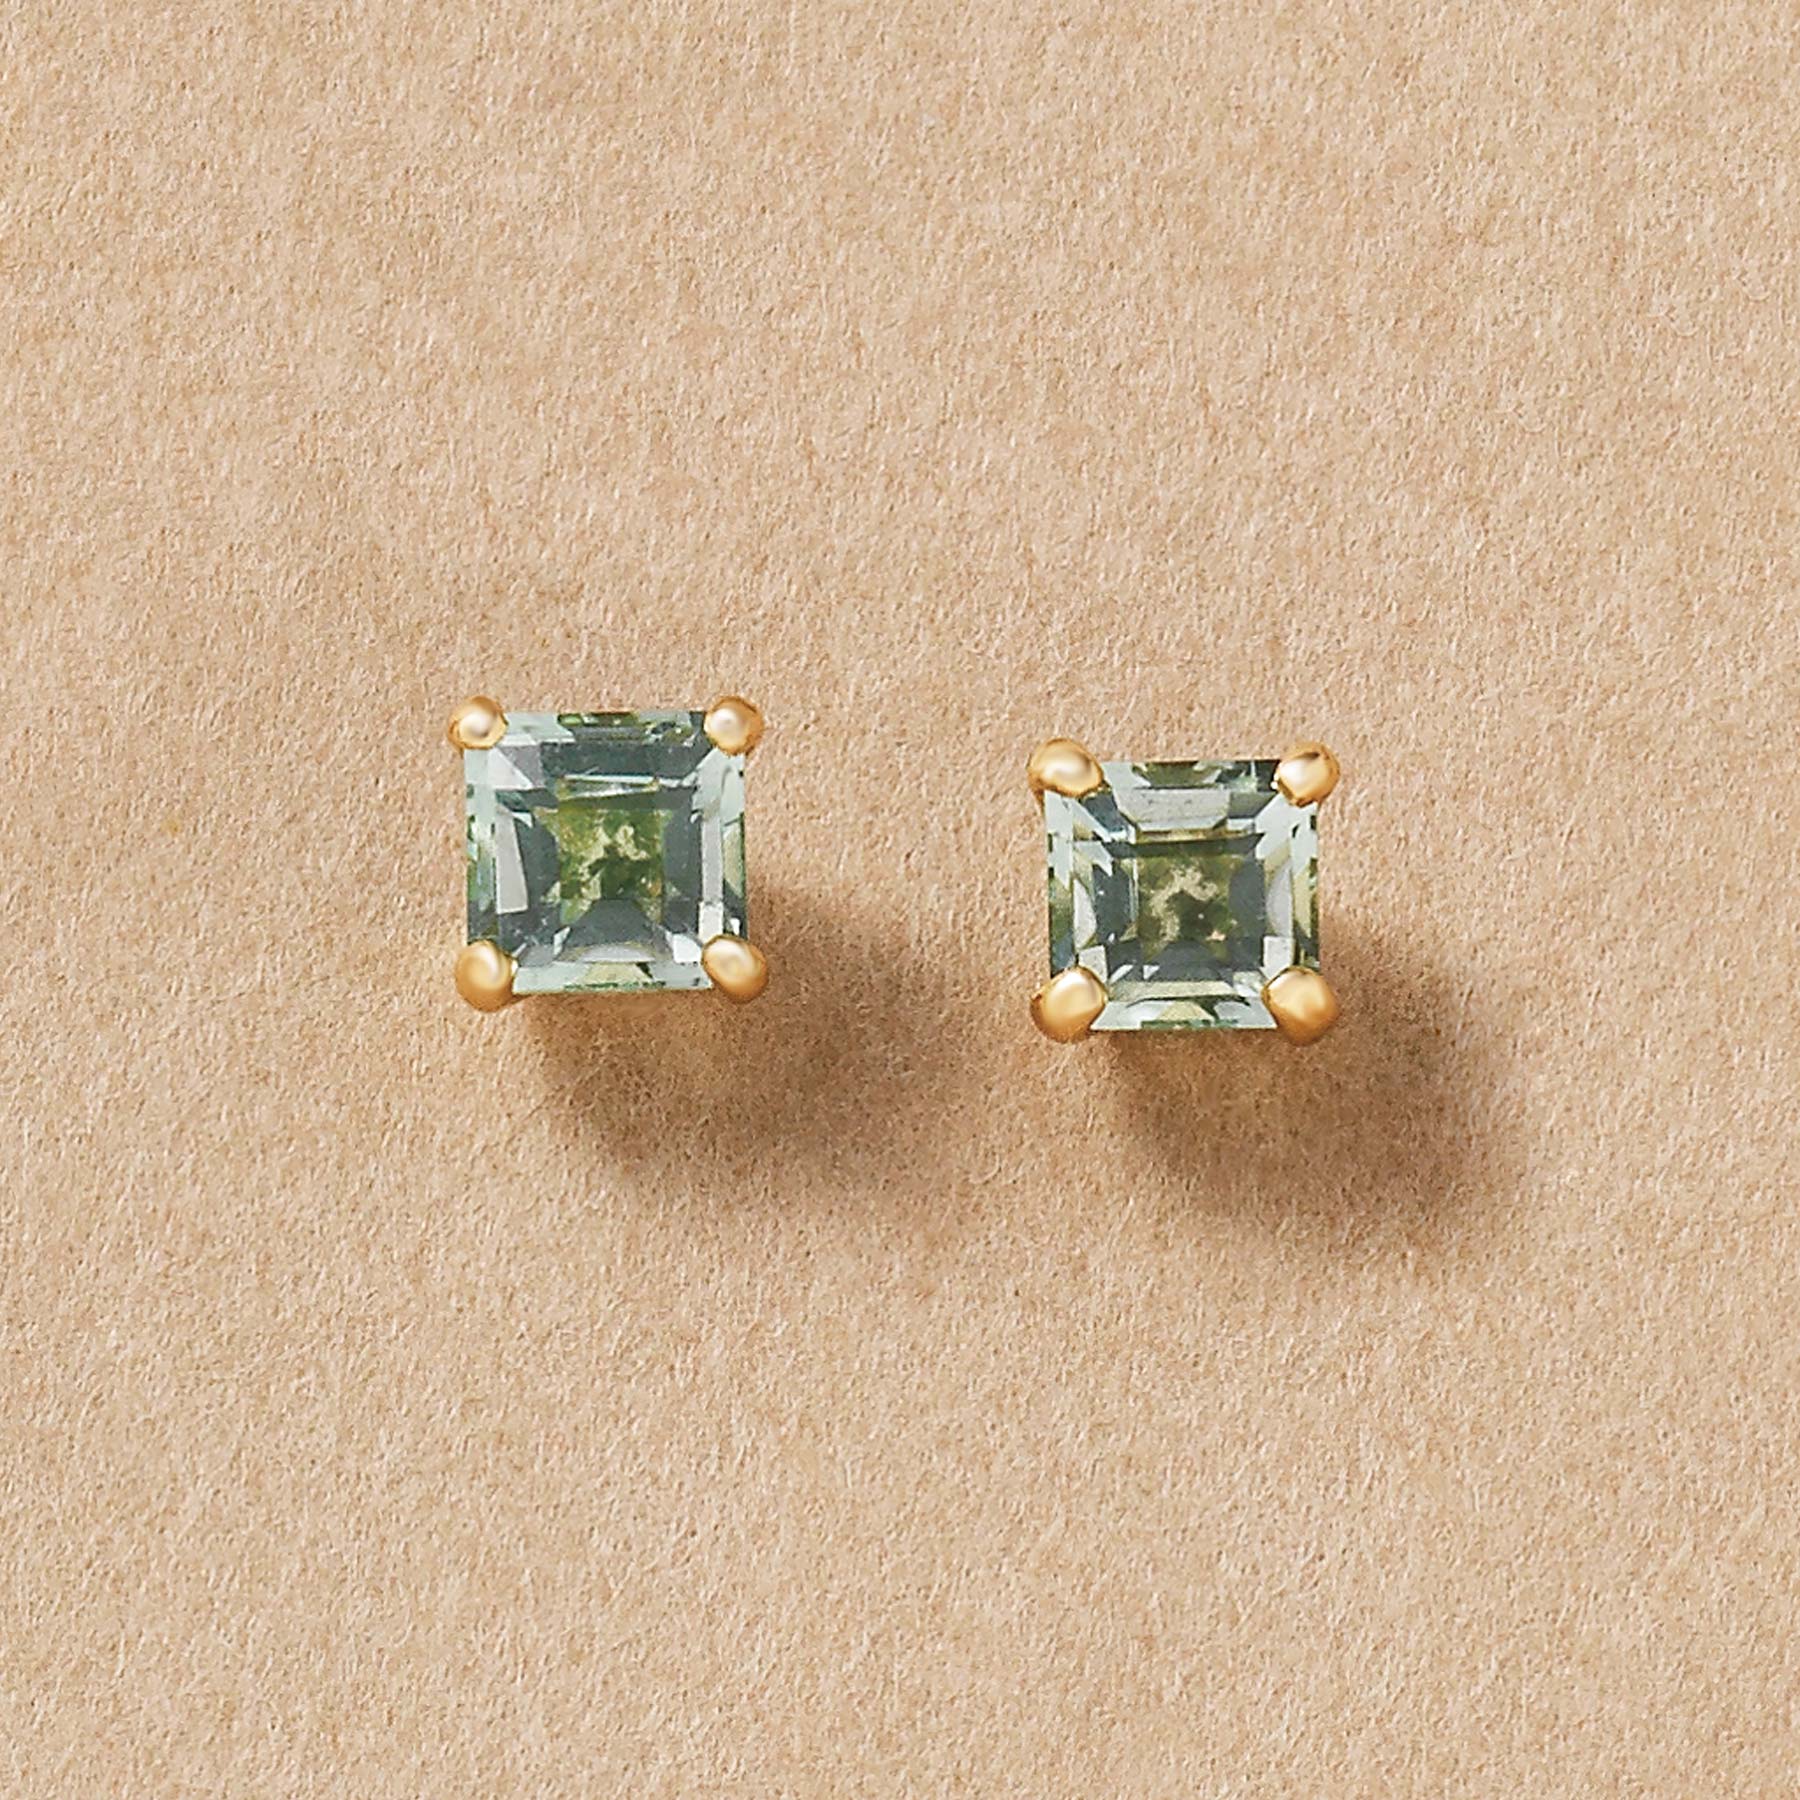 [Second Earrings] 18K Yellow Gold Square Chess Cut Earrings - Product Image